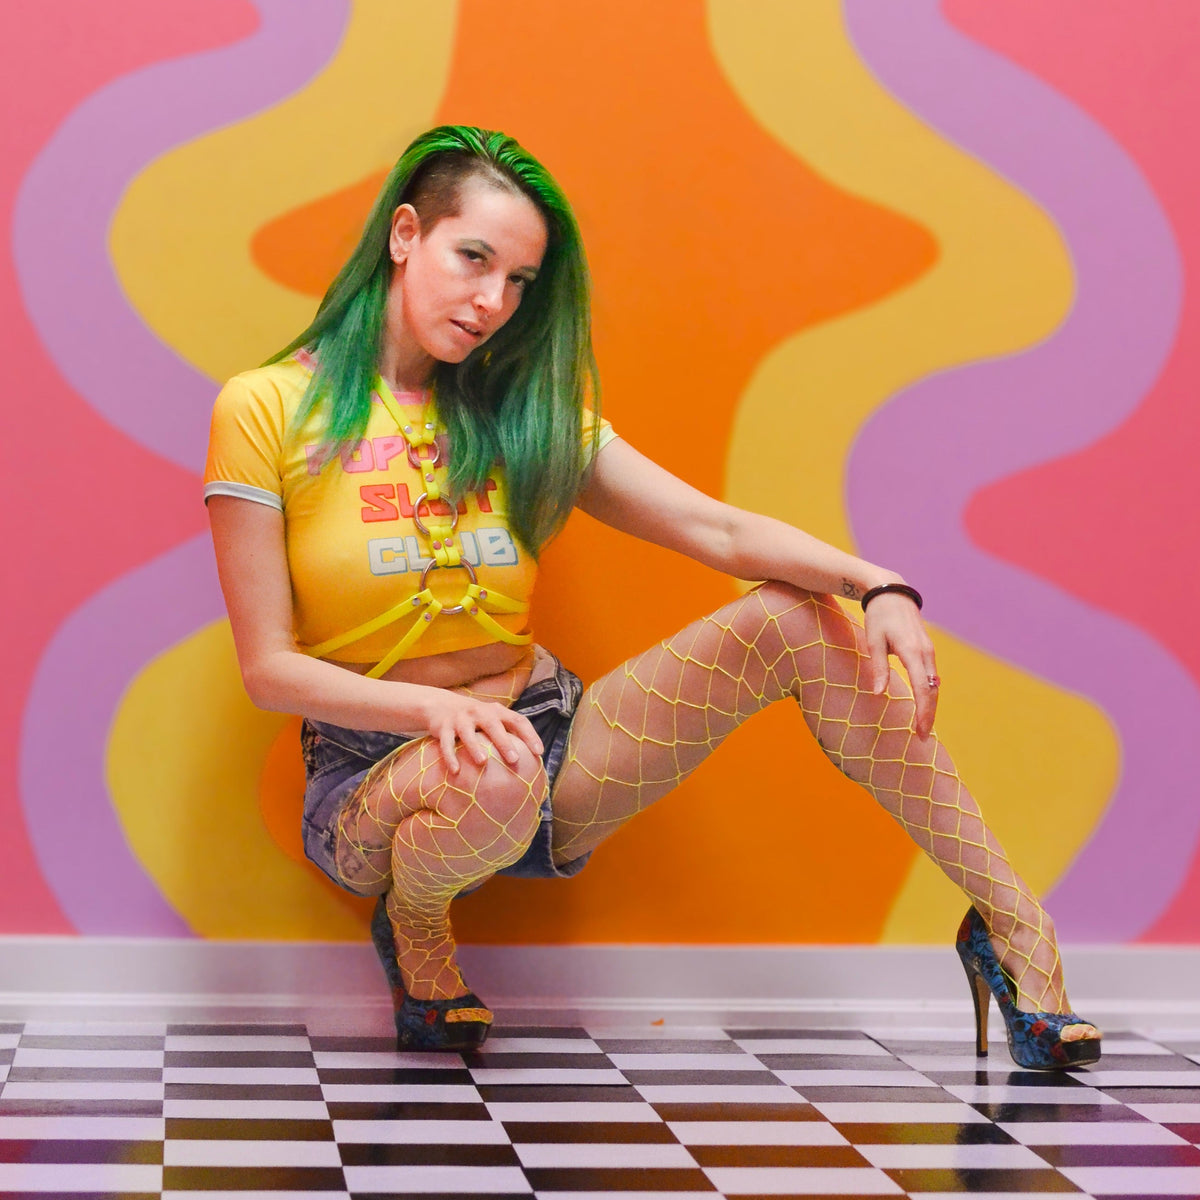 Woman crouching wearing a neon yellow waist harness over her colourful outfit.